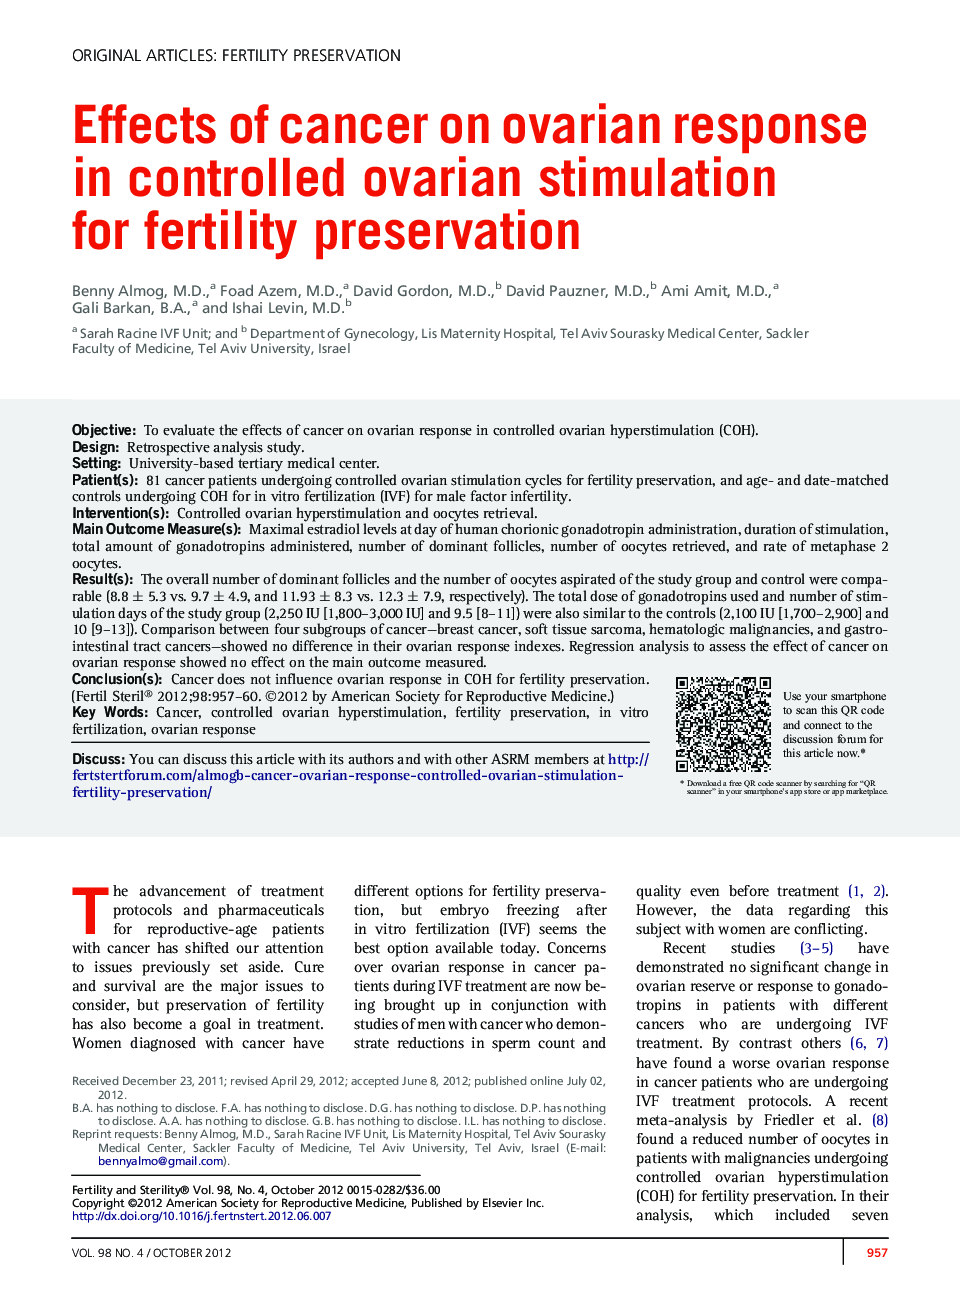 Effects of cancer on ovarian response in controlled ovarian stimulation for fertility preservation 